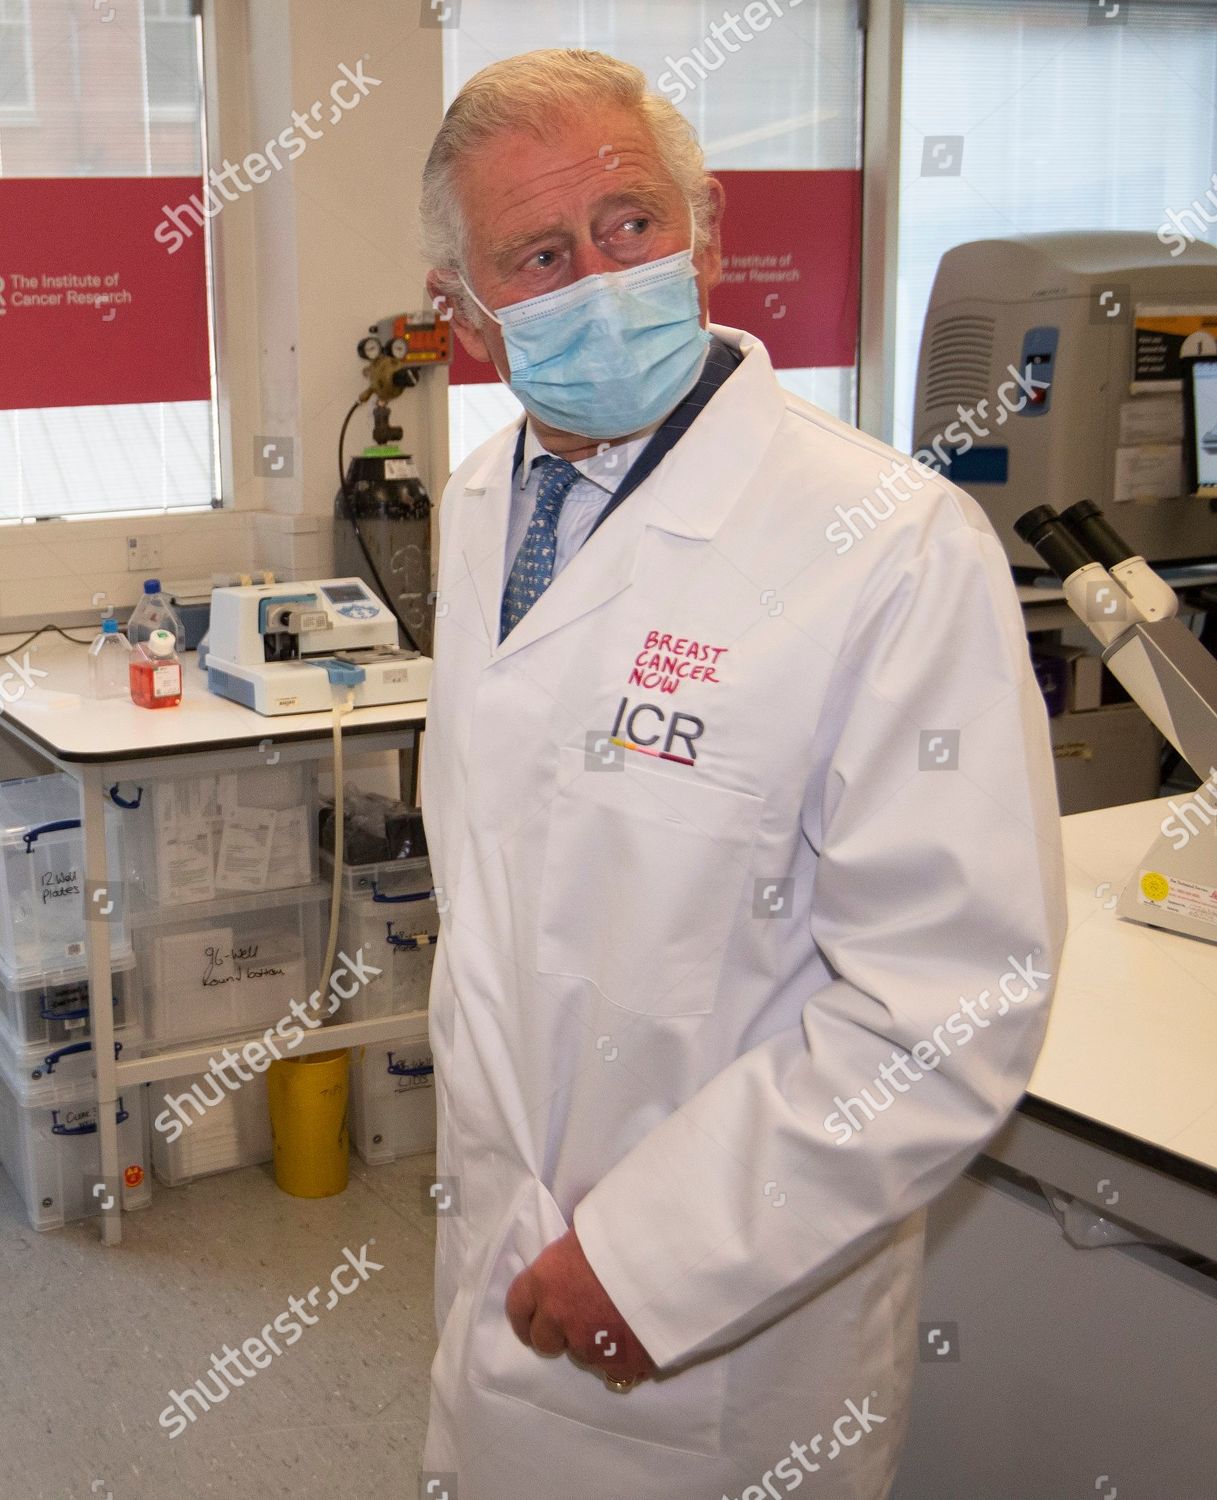 prince-charles-visits-the-breast-cancer-now-toby-robins-research-centre-london-uk-shutterstock-editorial-11902309k.jpg